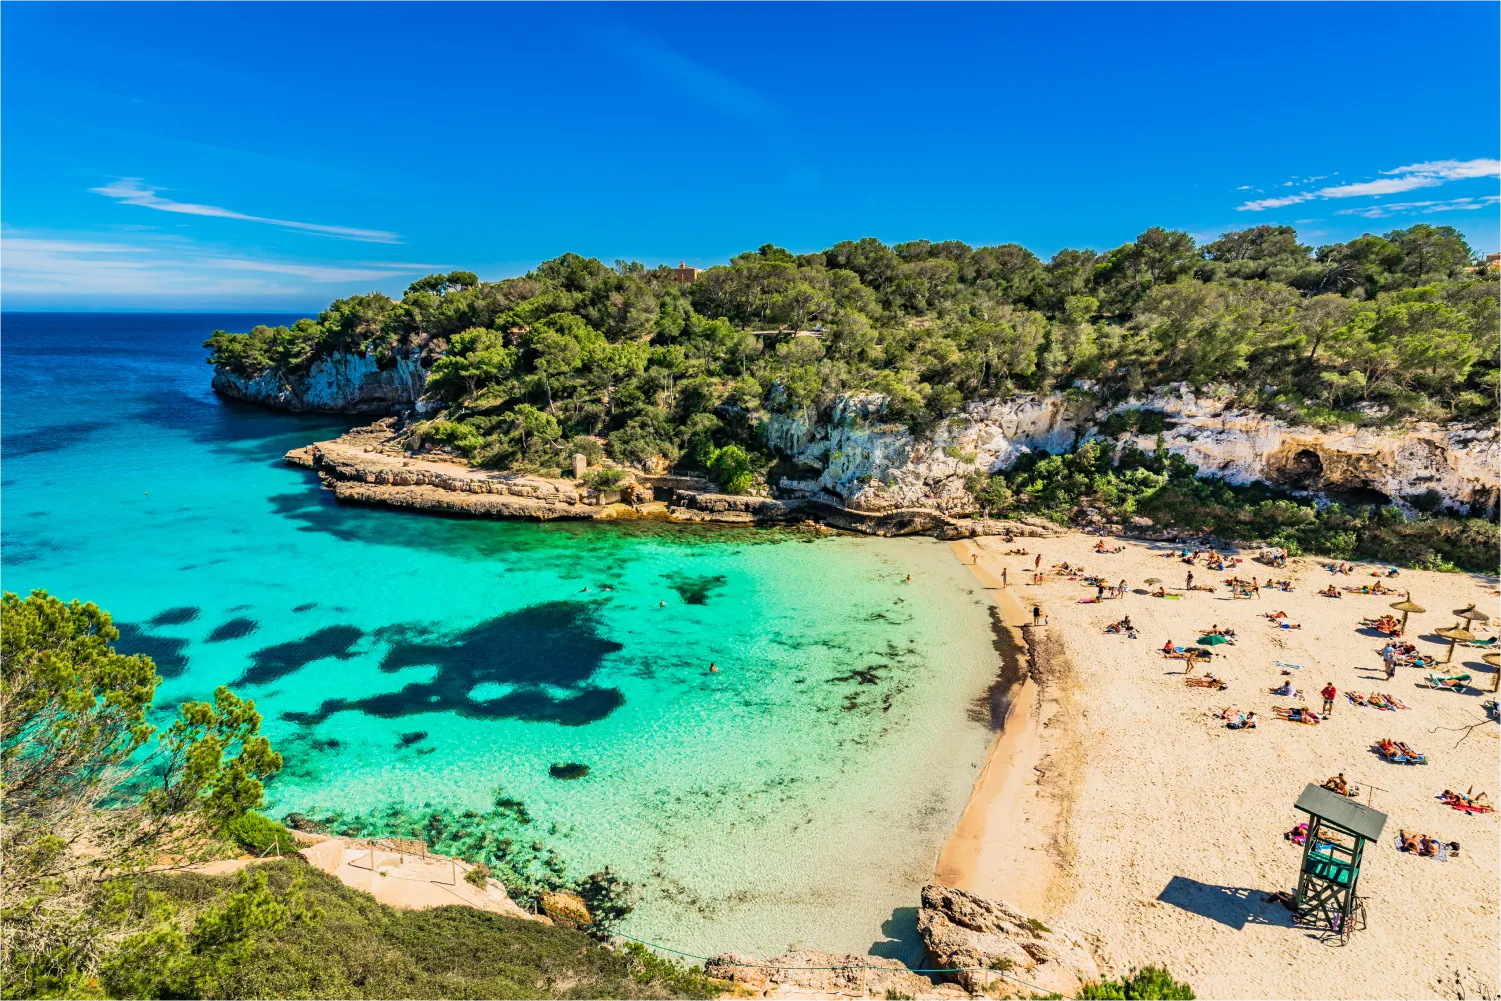 Cala Llombards In Mallorca. People sunbathing on the sand while being surrounded by green rocky cliffs